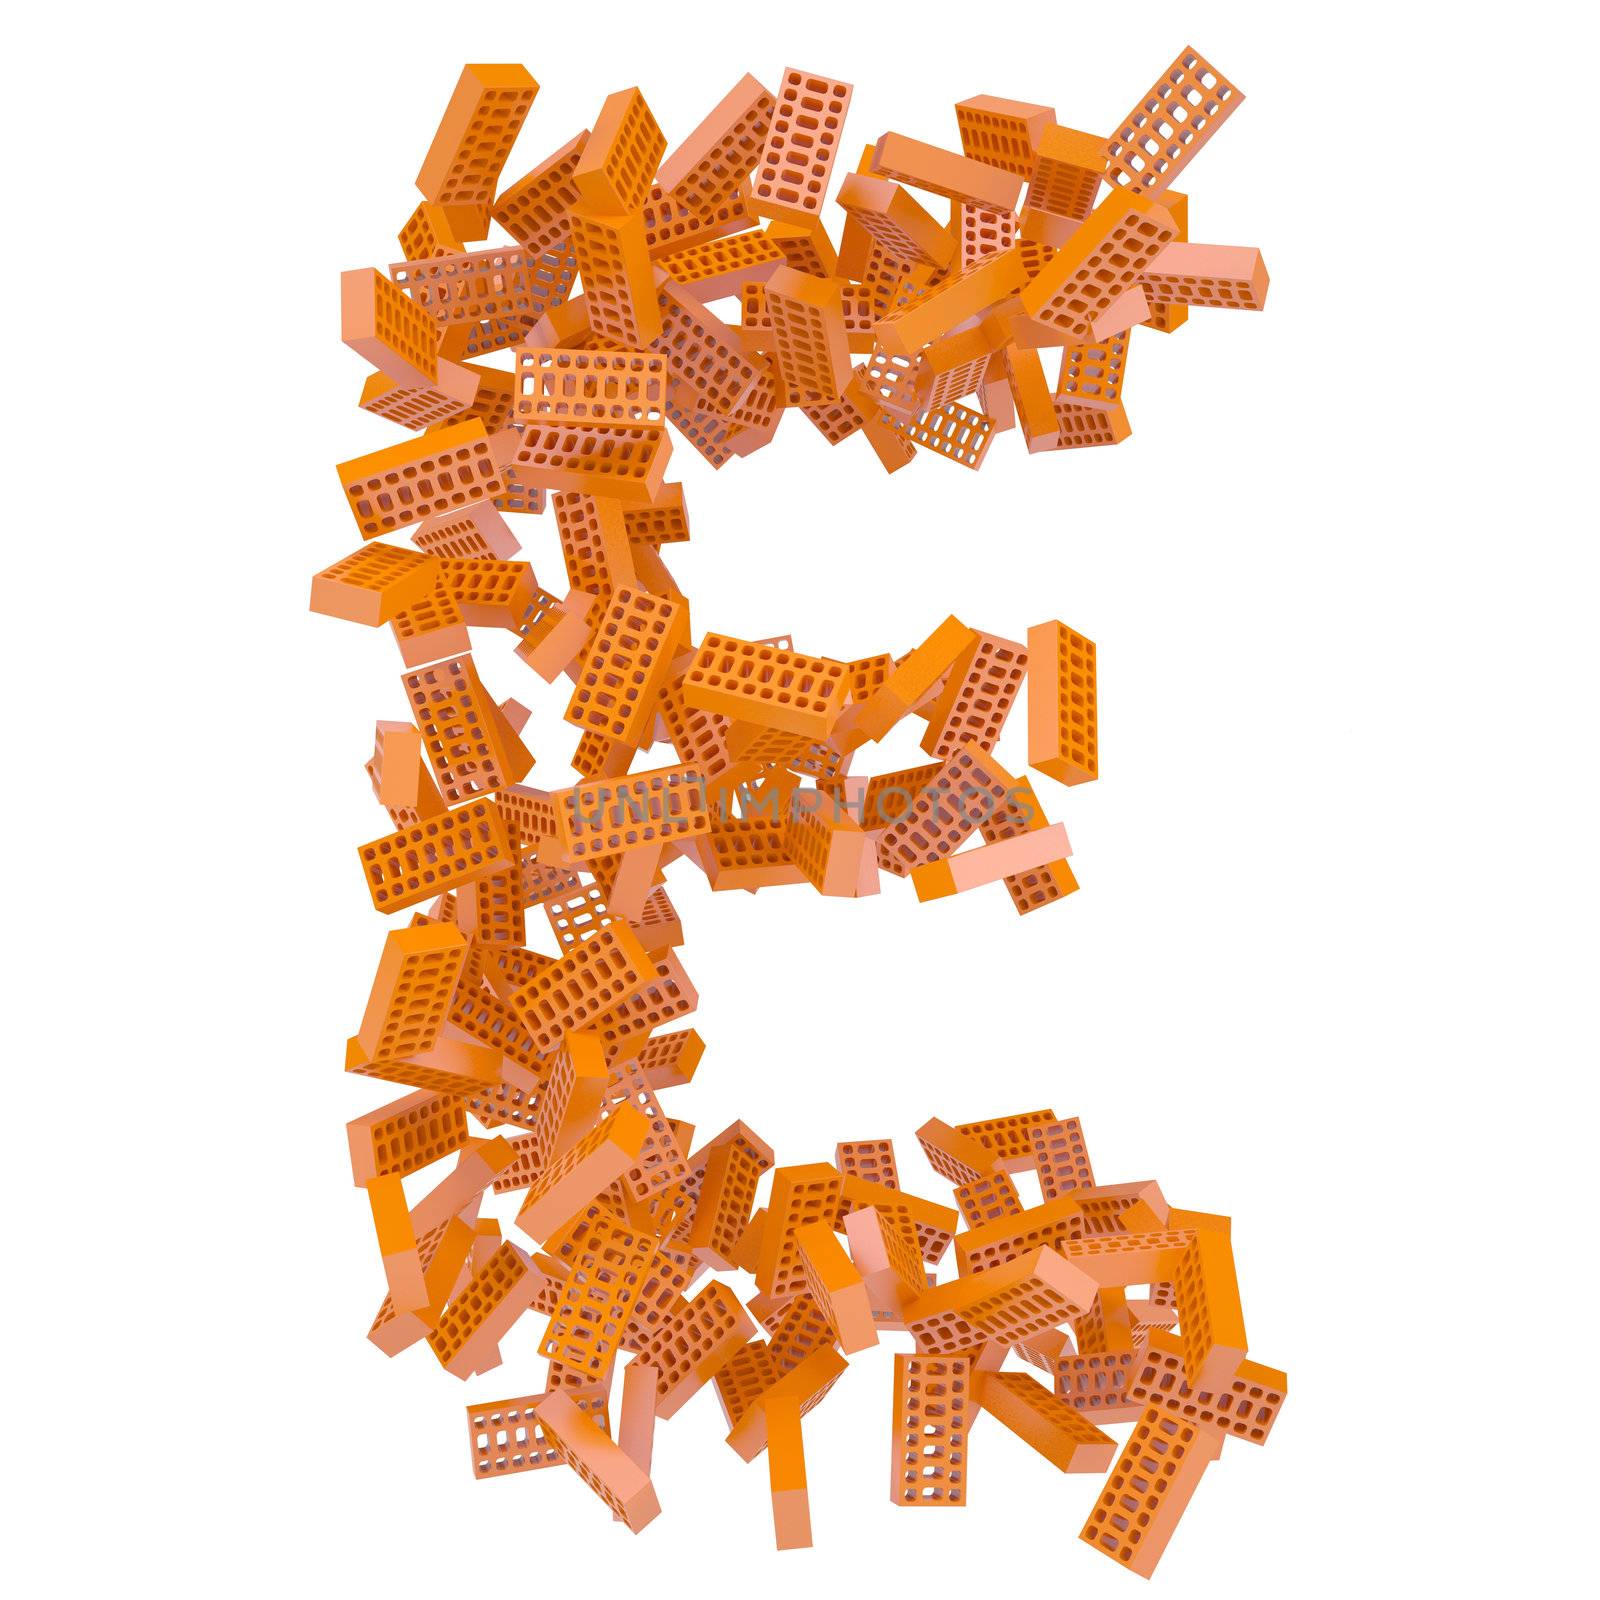 The letter E is made up of bricks by cherezoff